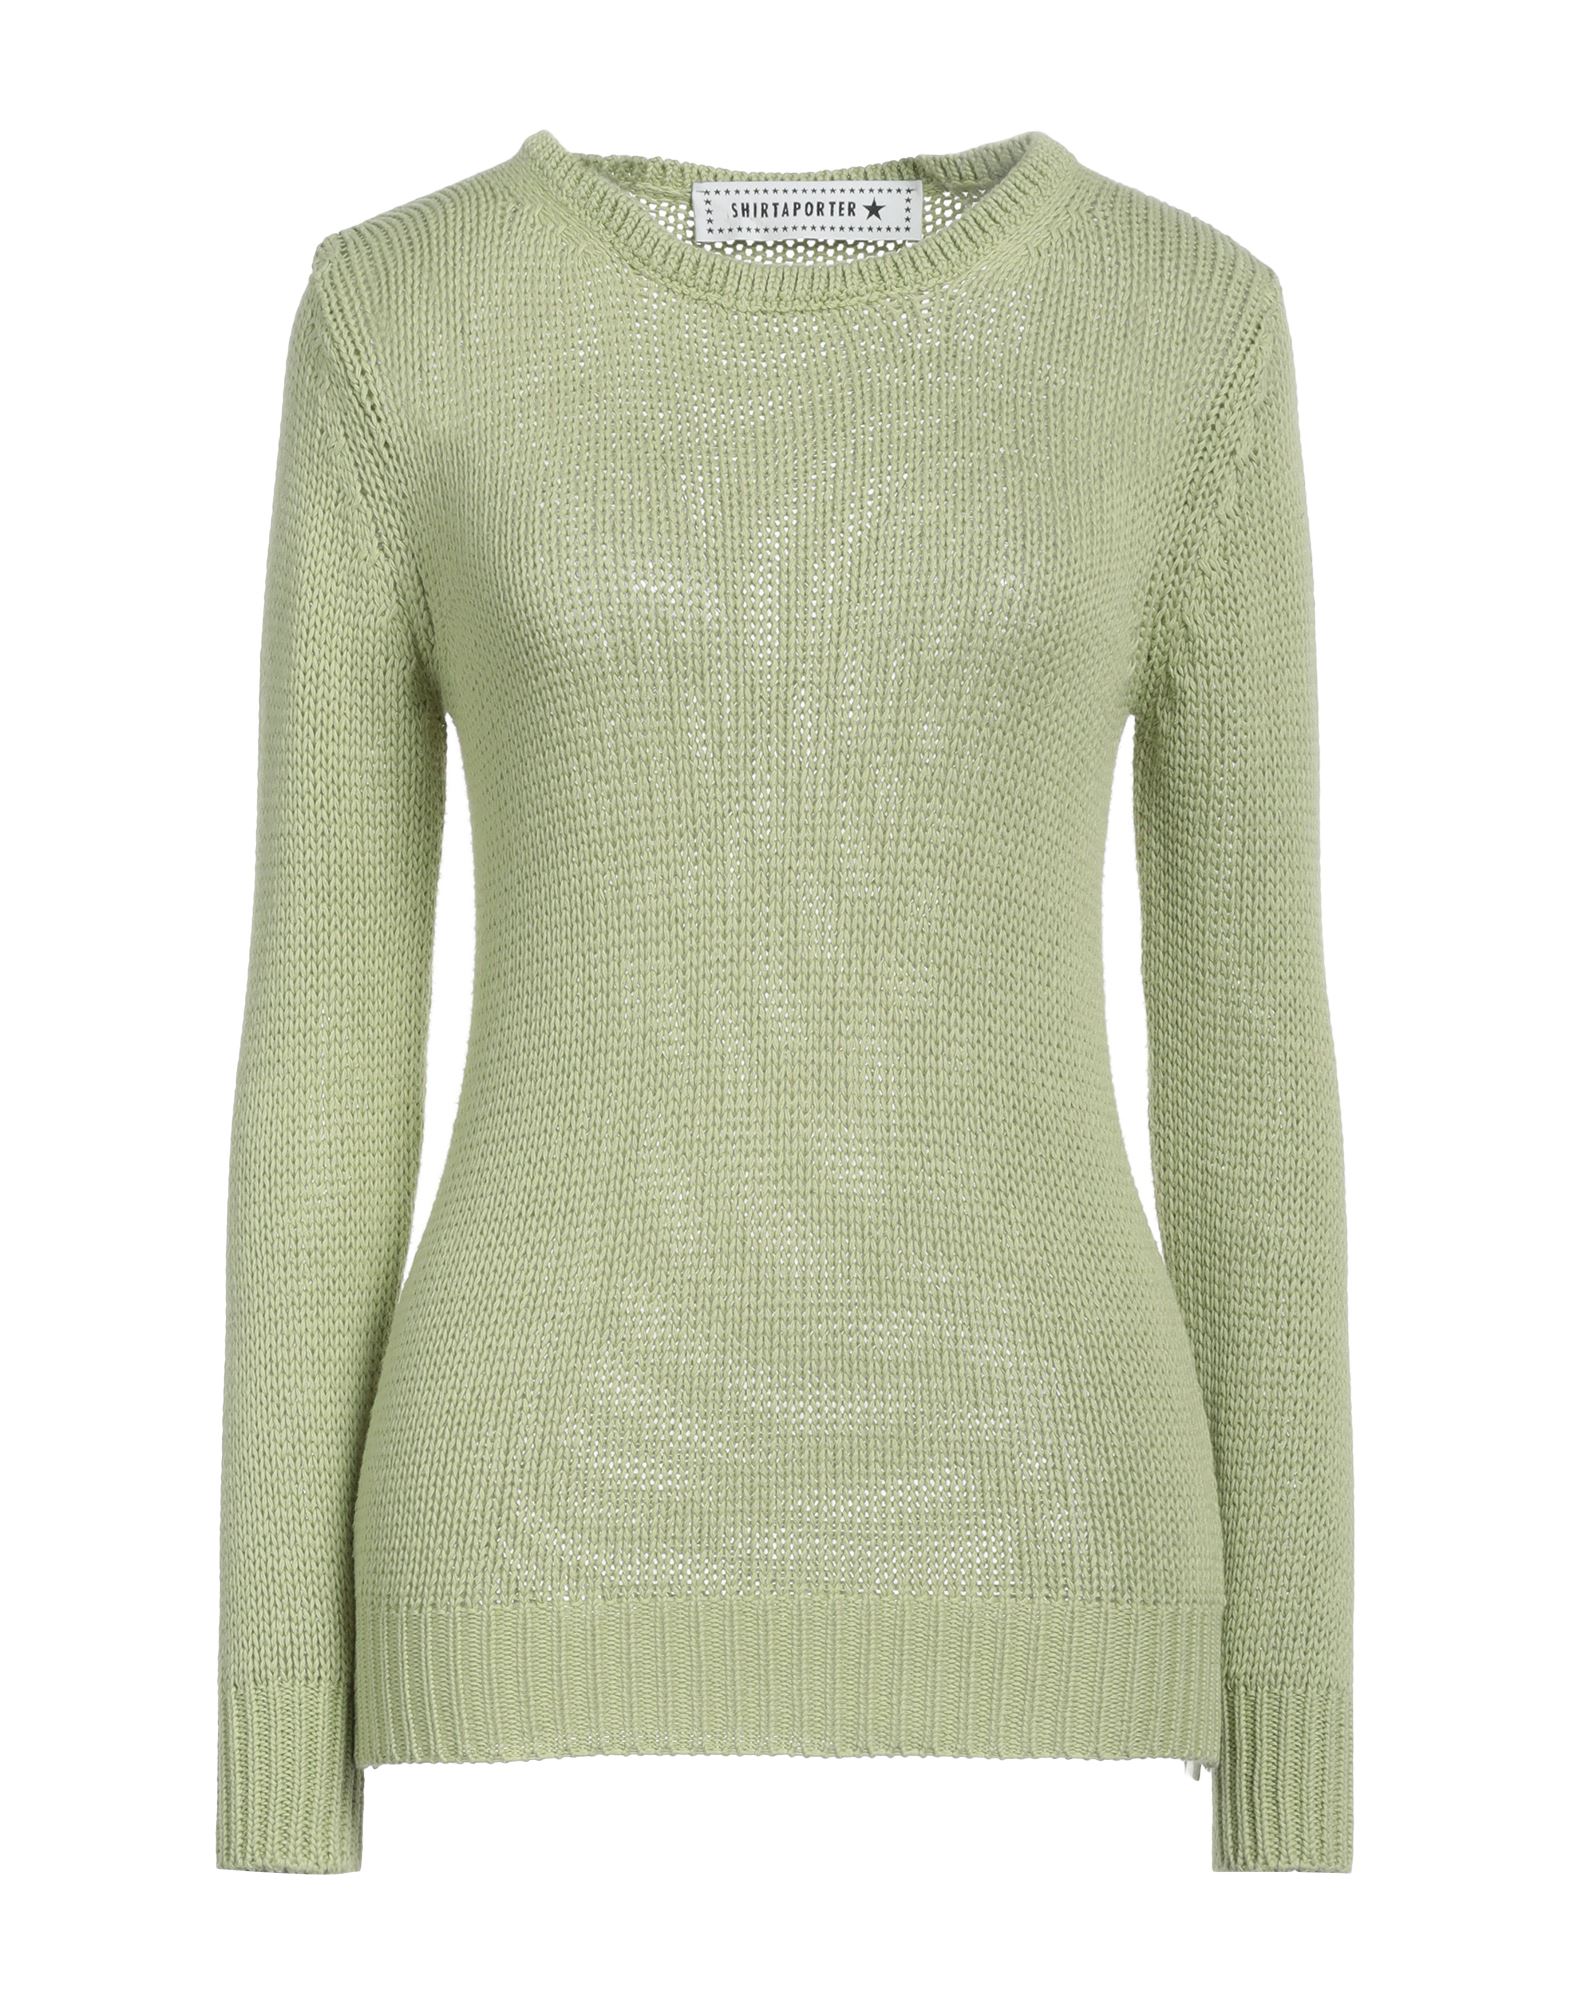 Shirtaporter Sweaters In Sage Green